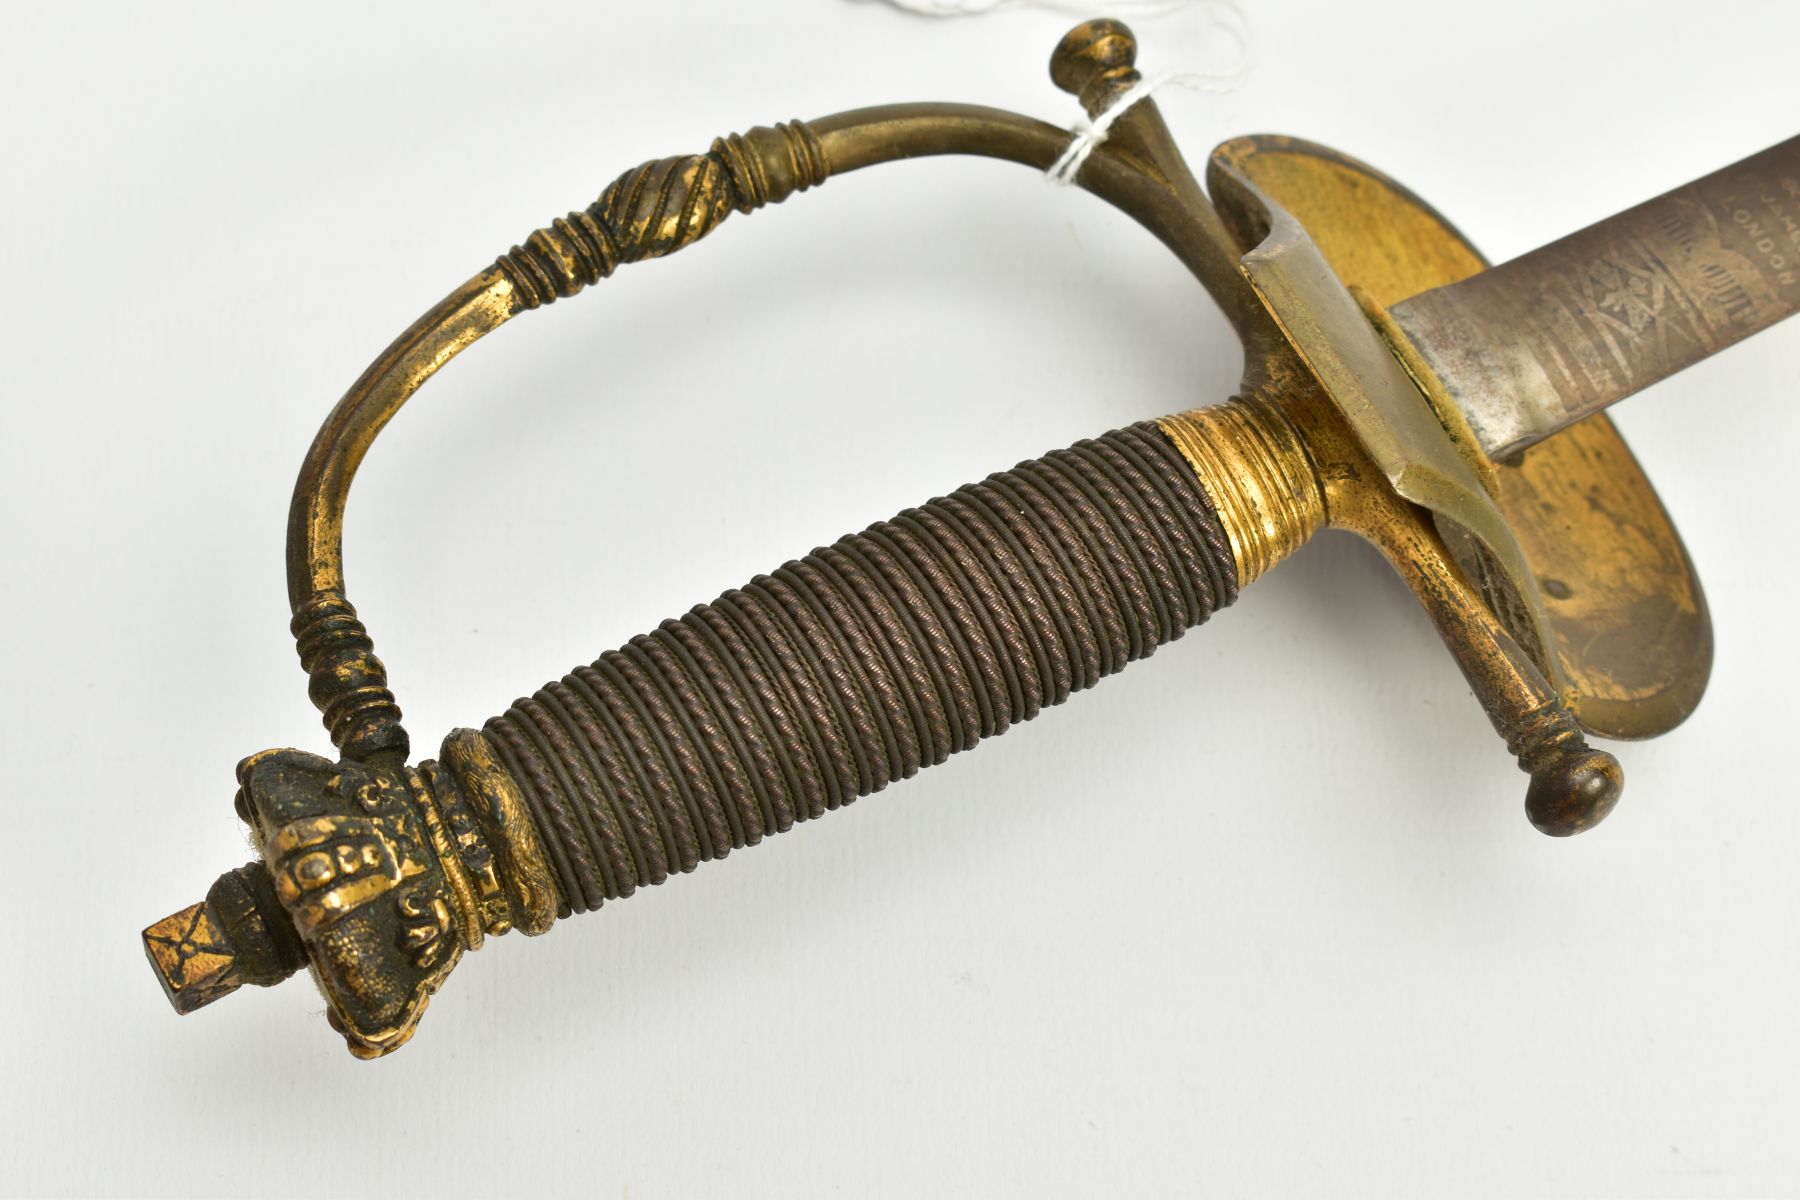 A BRITISH VICTORIAN ERA RAPIER SWORD, blade is approximately 79cm in length, the blade is - Image 8 of 11